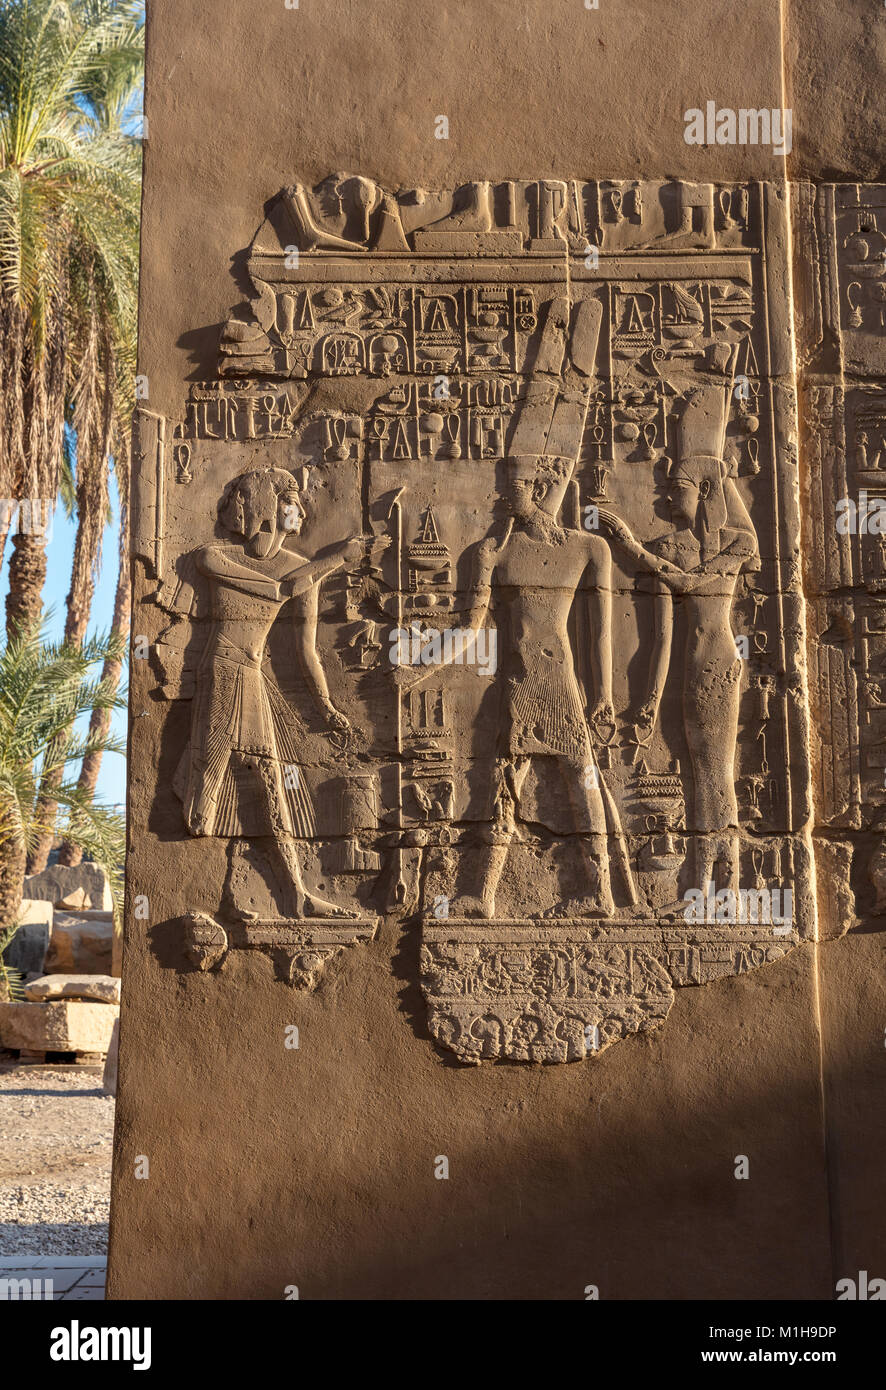 Relief of Pharaoh Seti I making offer to gods Amun and Mut, hypostyle hall, Karnak Temple, Luxor, Egypt Stock Photo